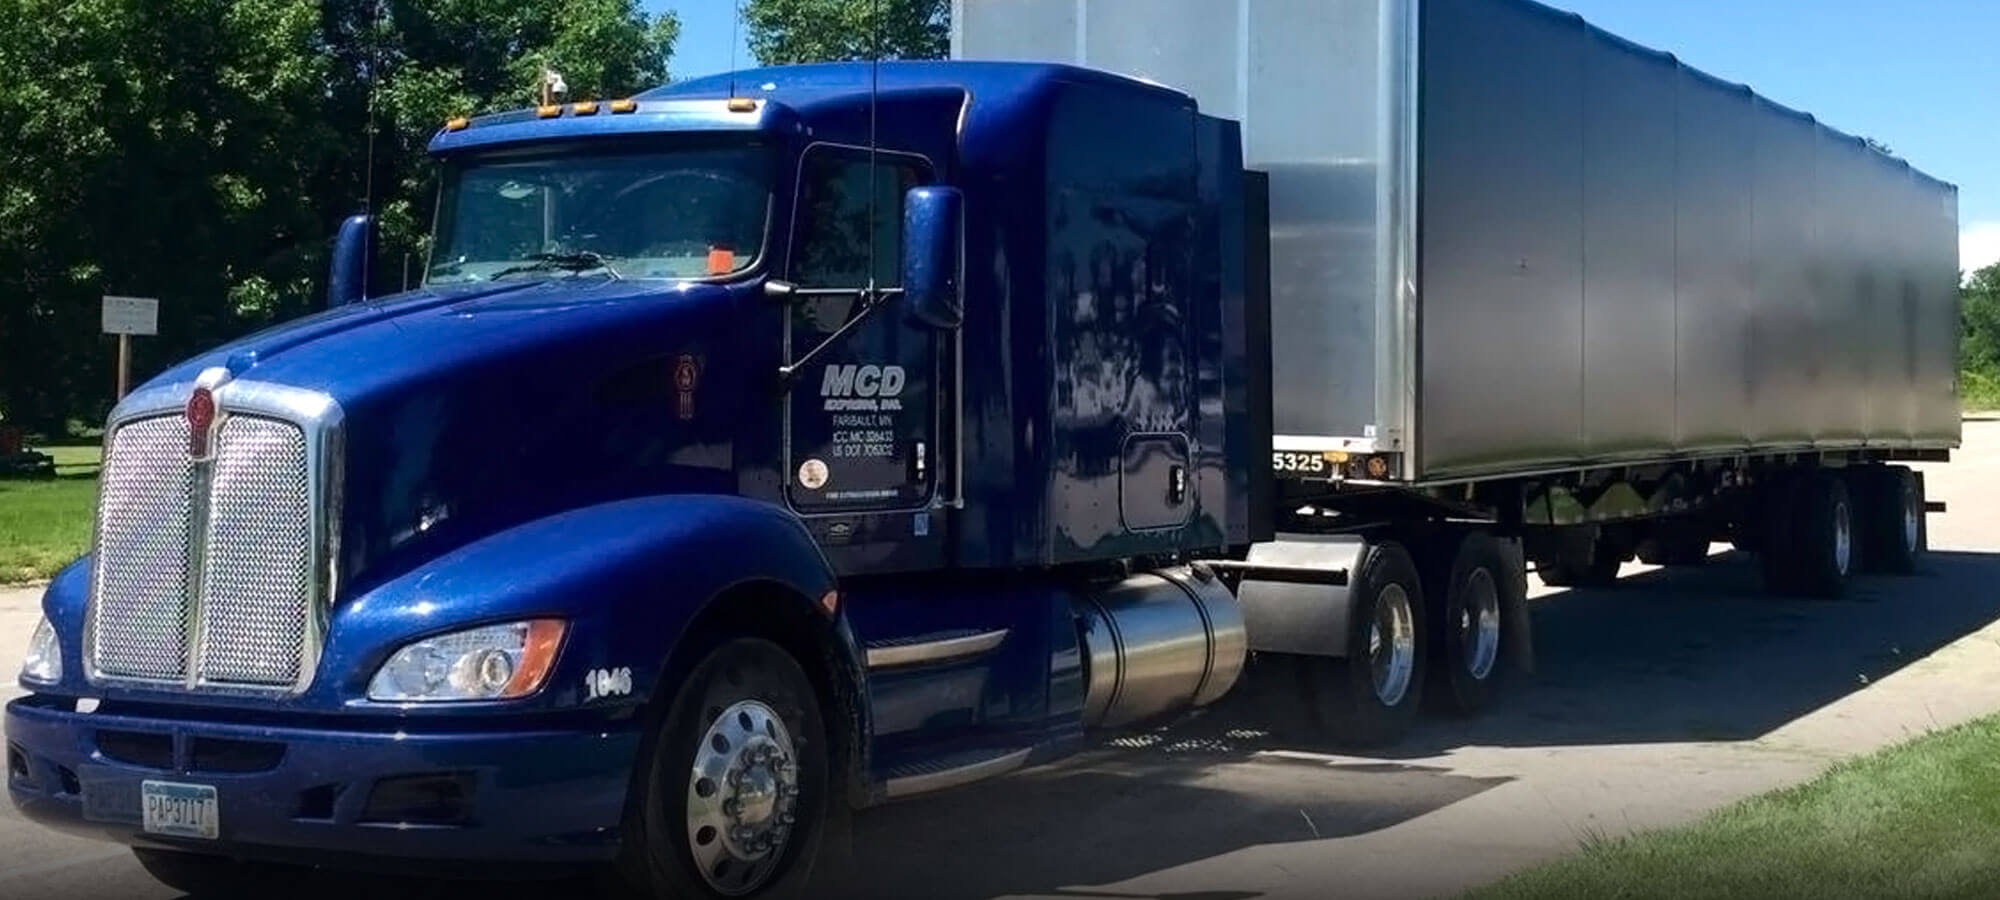 Royal blue MCD Express semi tractor hauling a dry van container